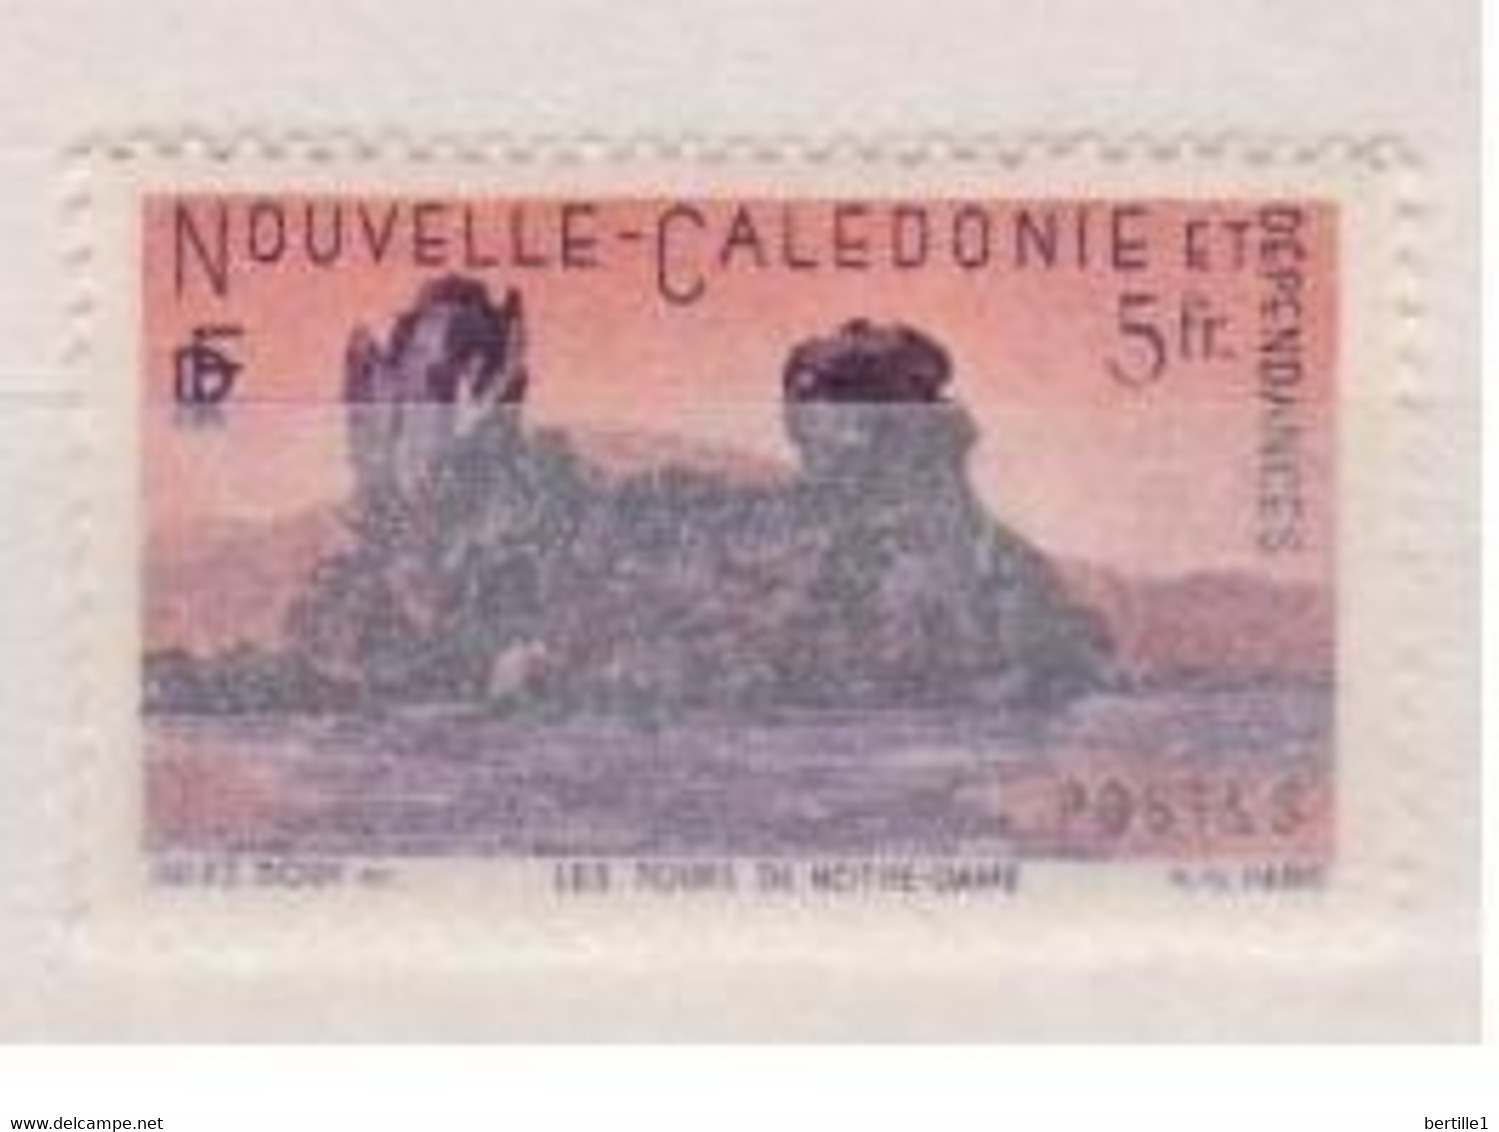 NOUVELLE CALEDONIE         N°  YVERT  272   NEUF AVEC CHARNIERES       ( CHARN 4/12 ) - Unused Stamps